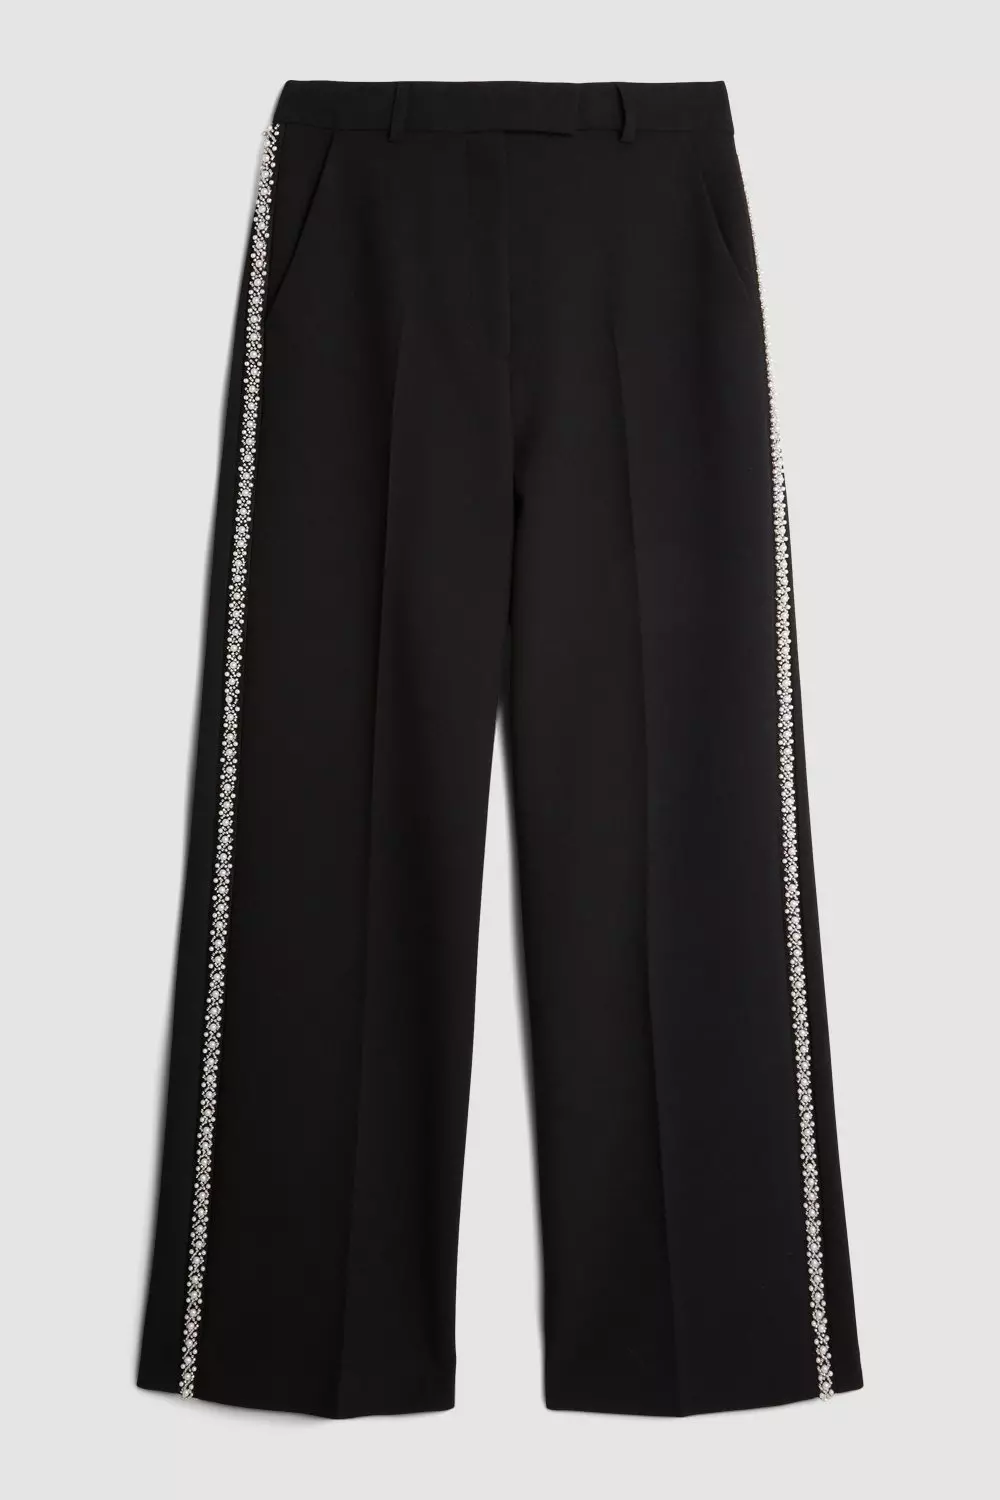 Lydia Millen Petite Compact Stretch Embellished Trousers | Karen 